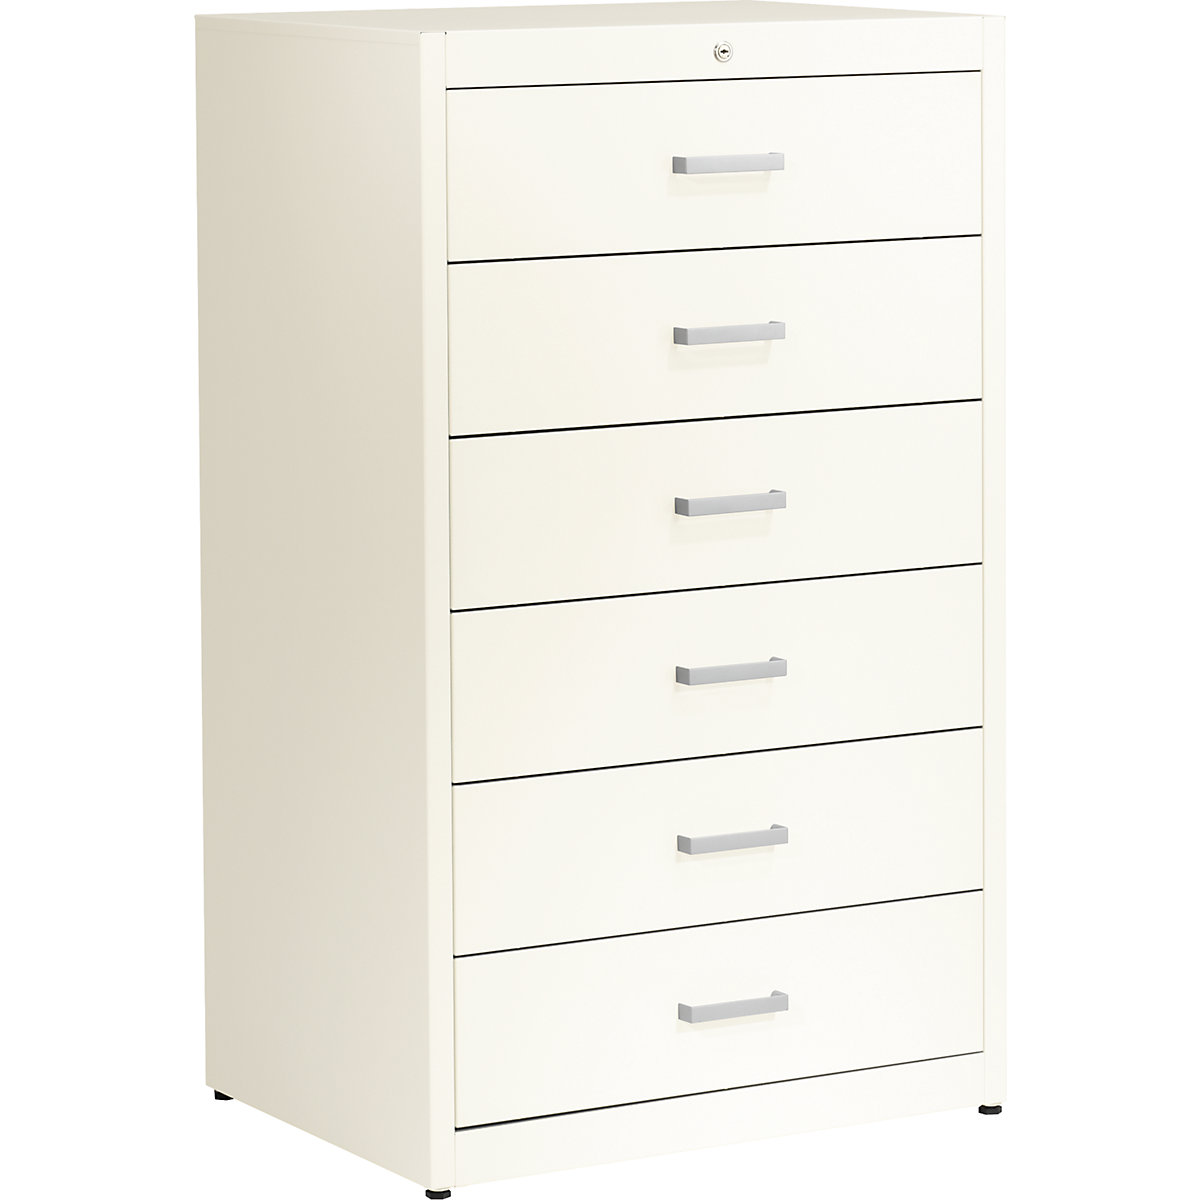 Card file cabinet, bar handles – mauser, 6 drawers, standard retraction mechanism, 3-track, pure white-4